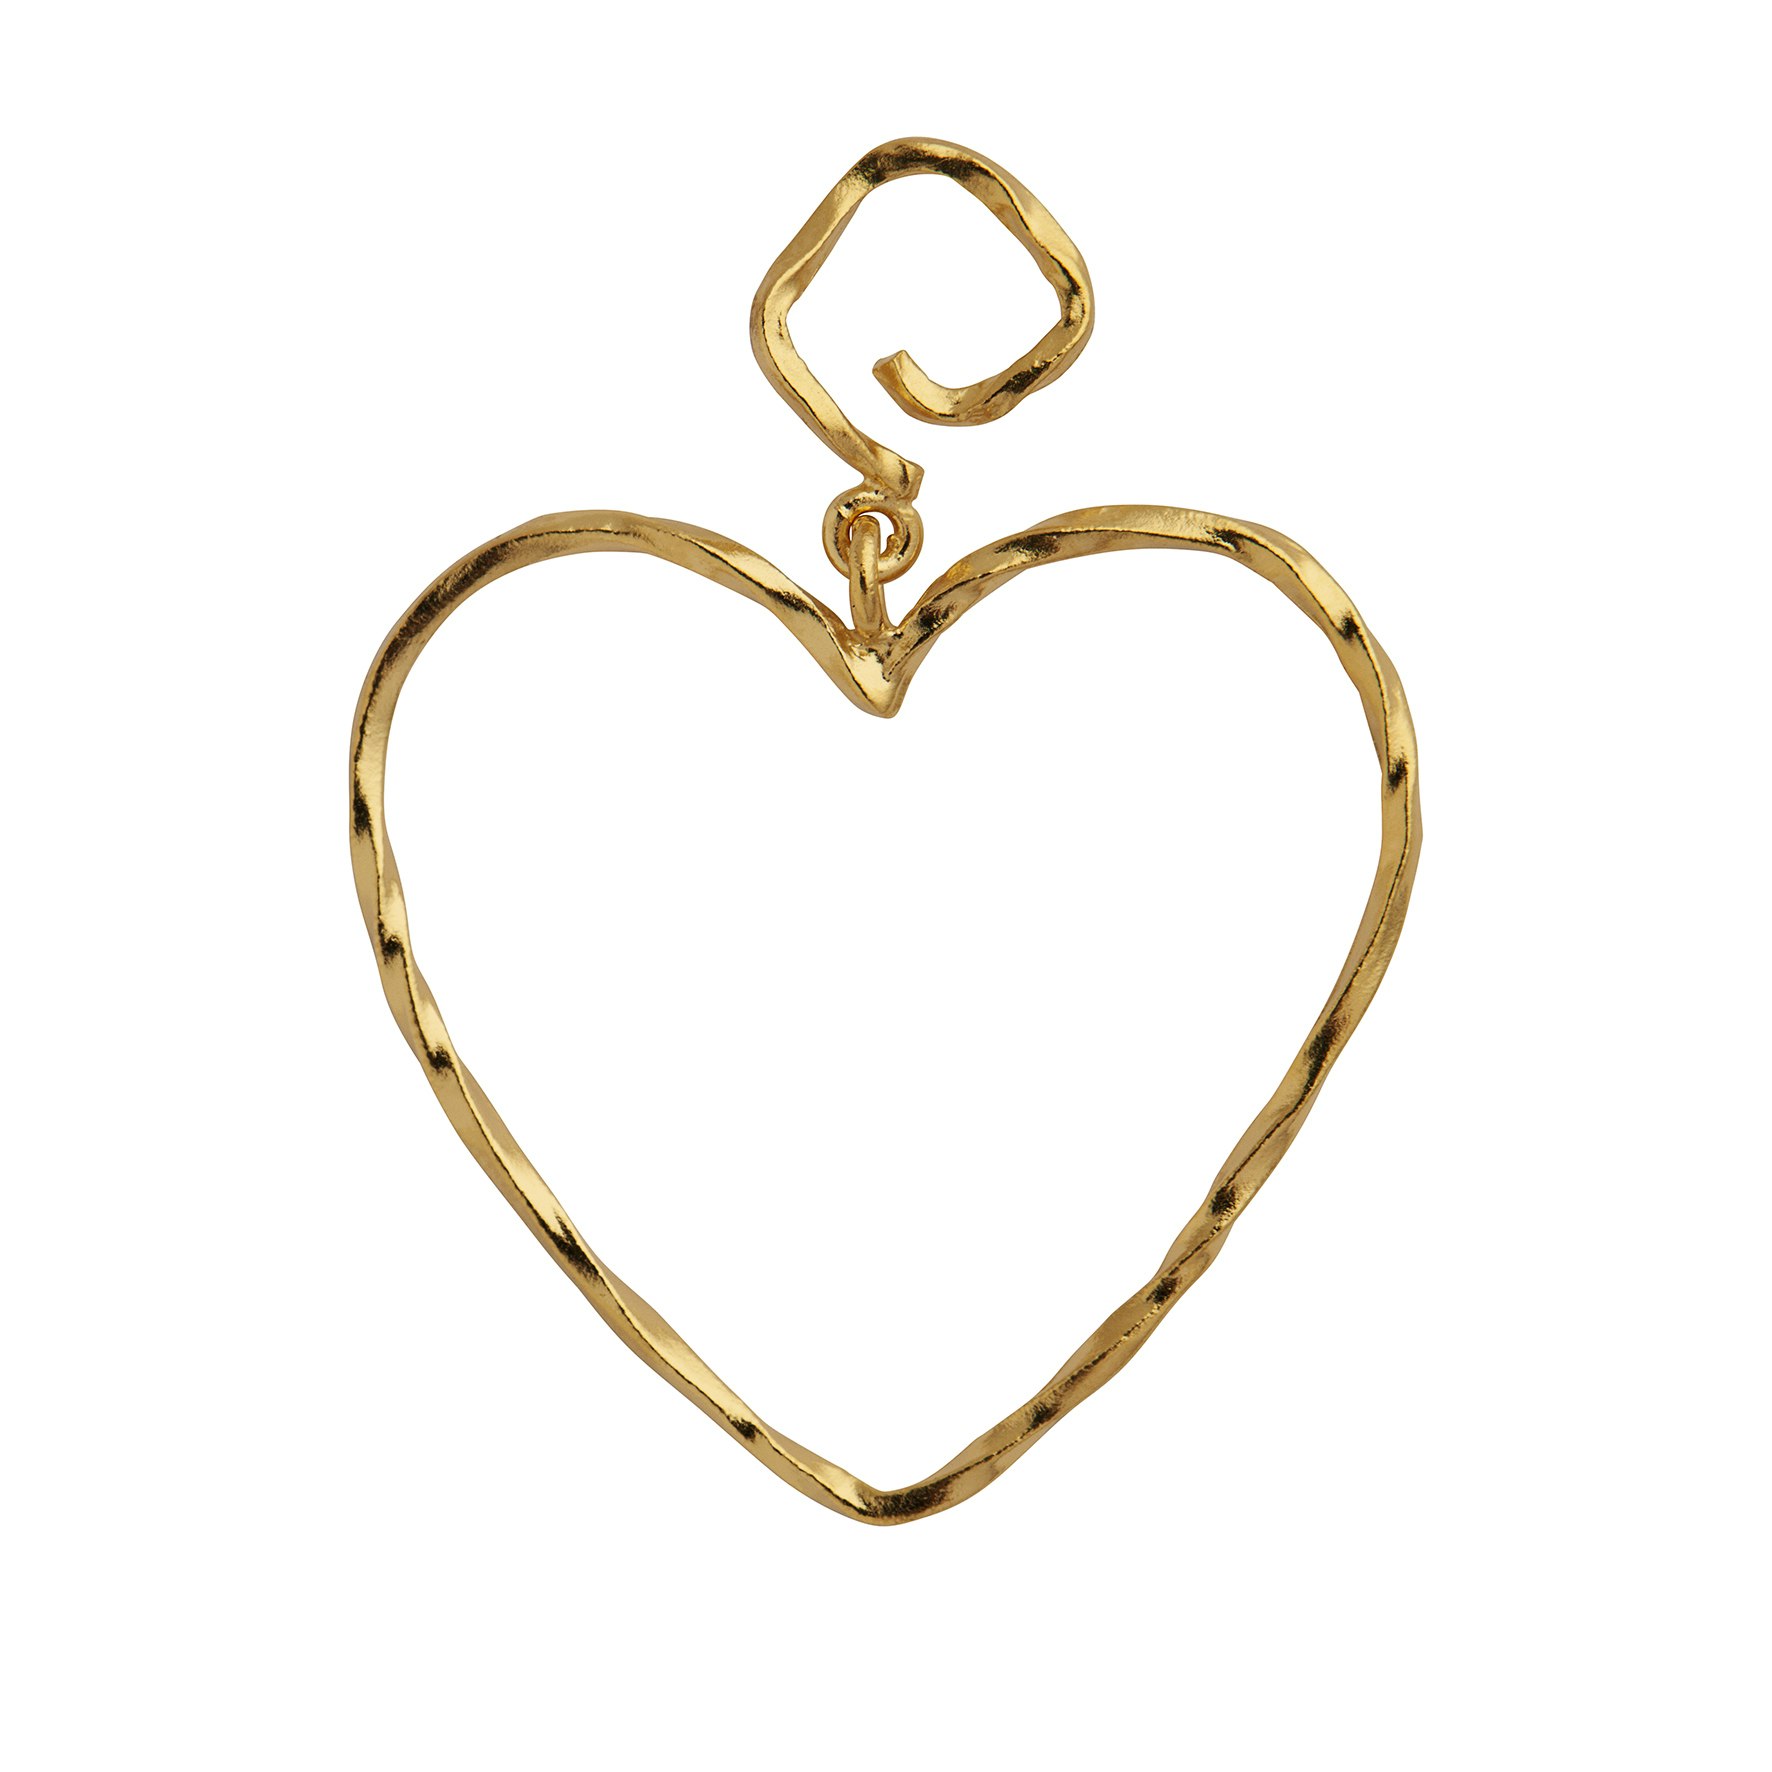 Funky Heart Earring from STINE A Jewelry in Goldplated-Silver Sterling 925